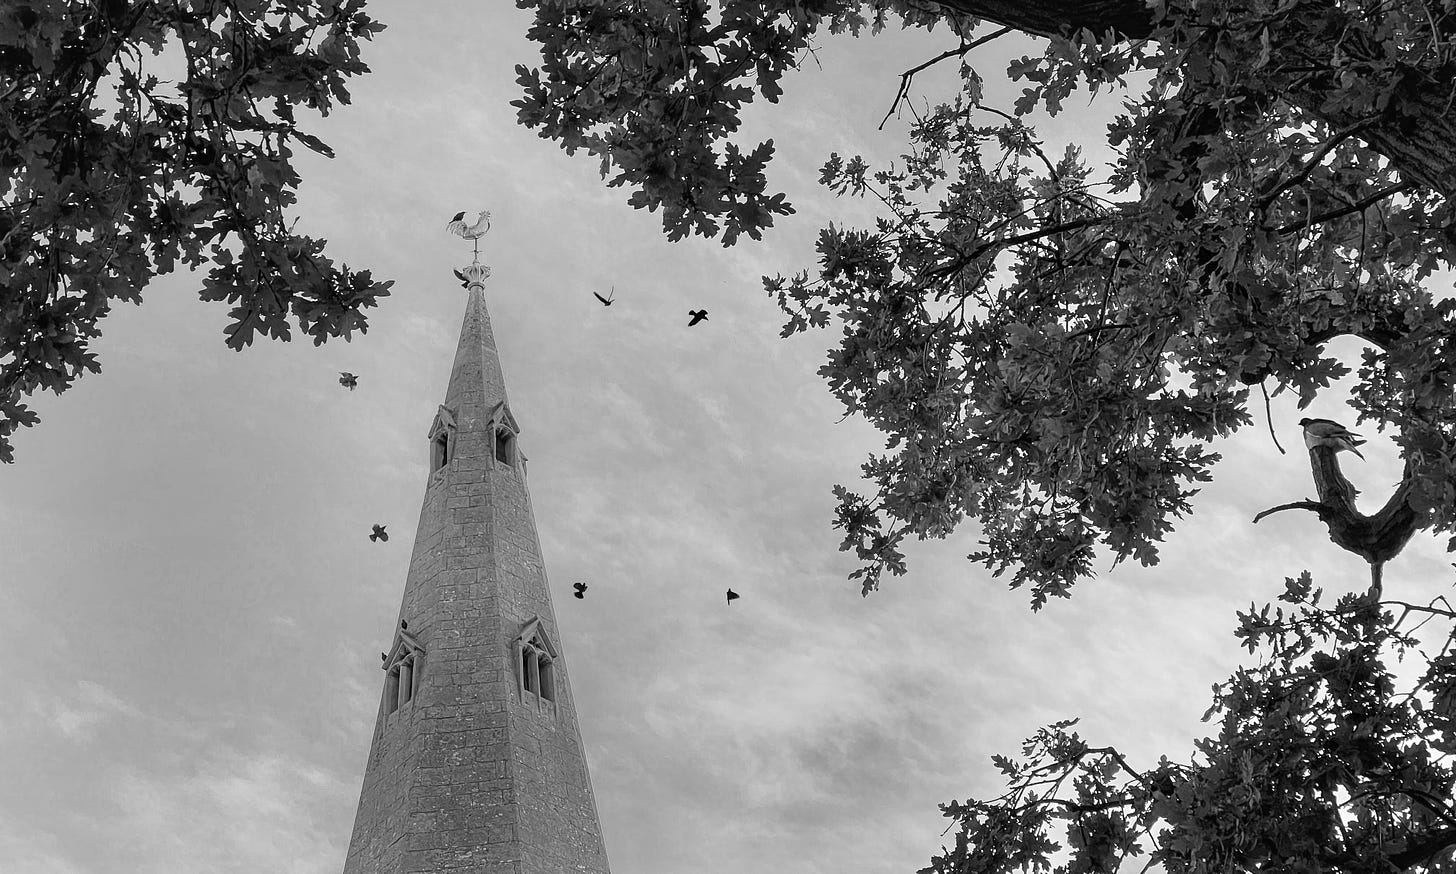 A photograph taken through the boughs of an oak tree show ten crows around a steeple being watched from the tree by a wood pigeon